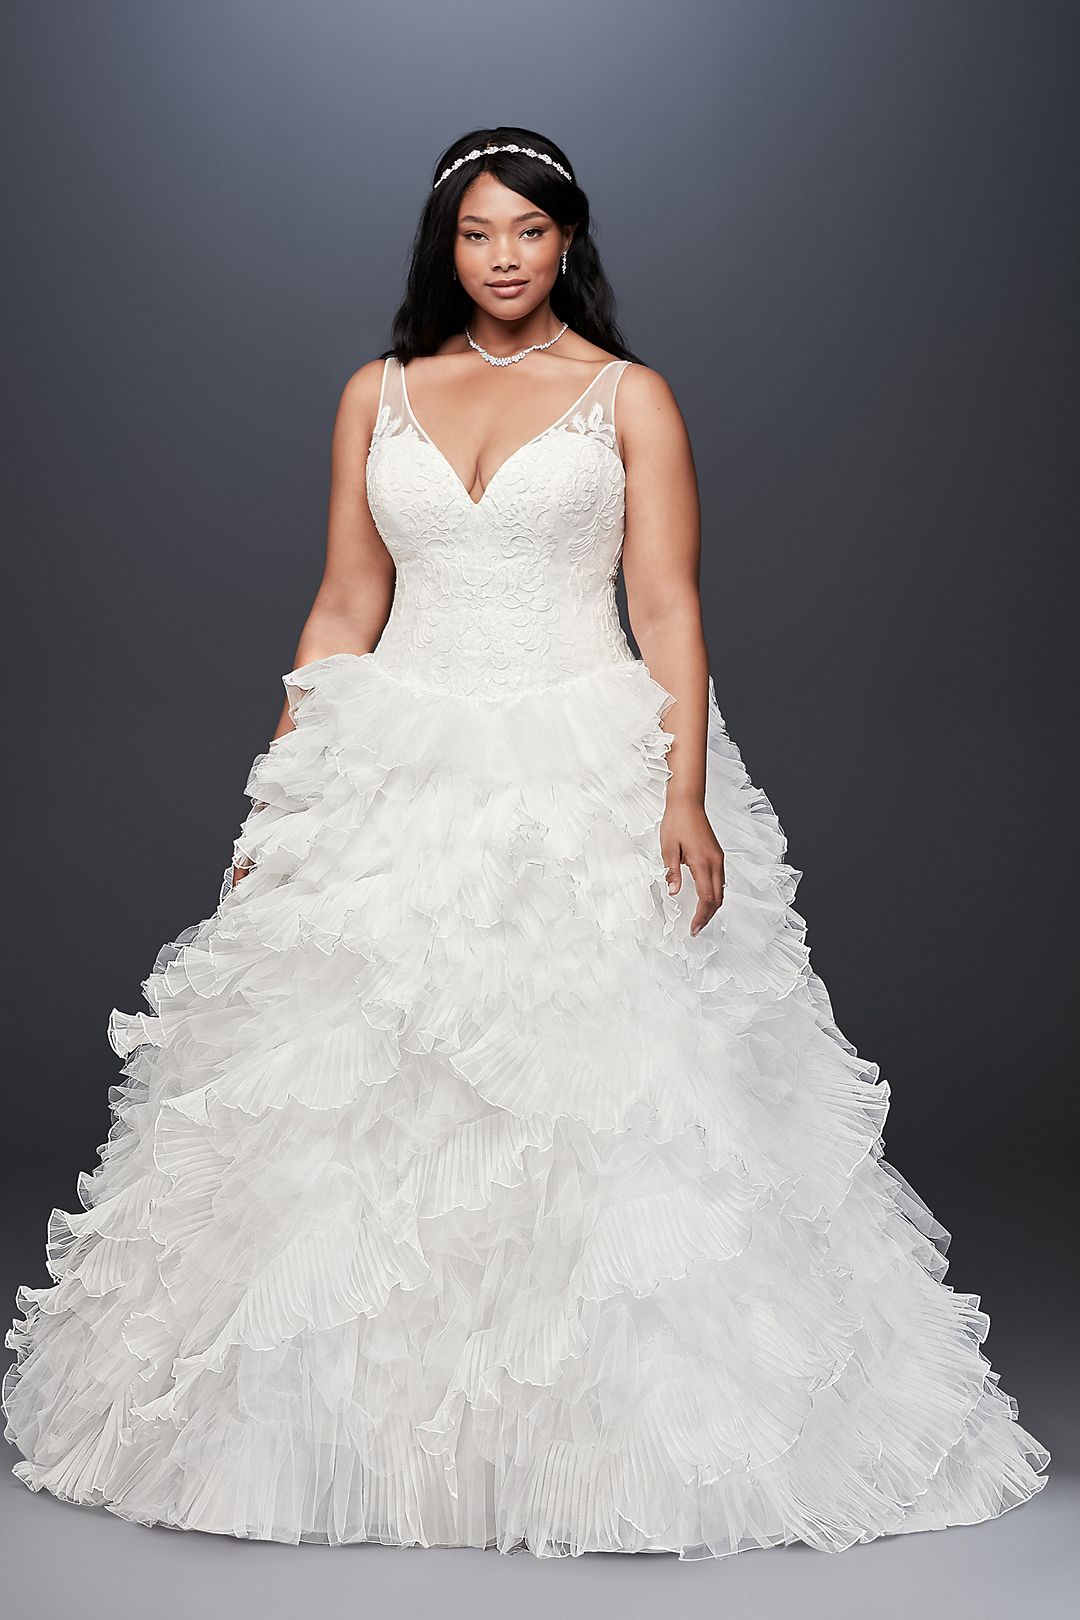 As-Is Plunging Plus Size Wedding Dress Image